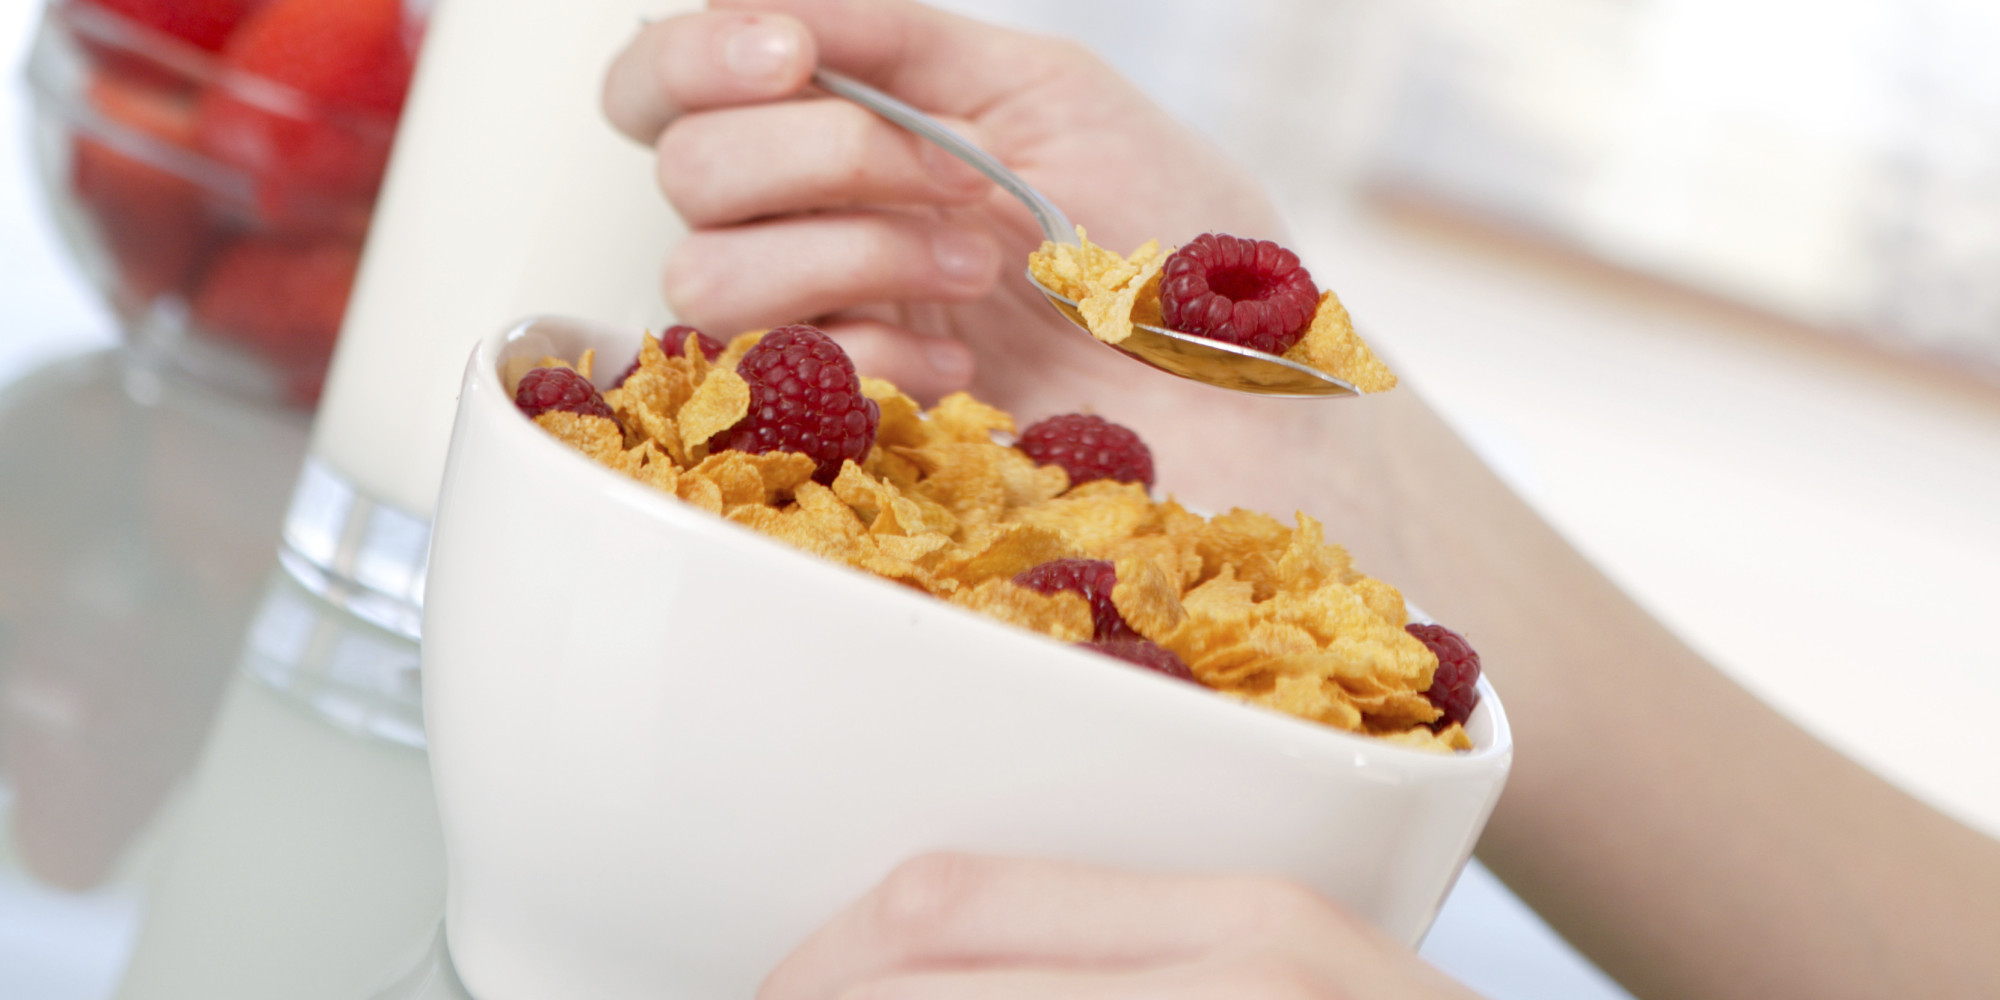 Healthy Breakfast Ideas For Teens
 Teens Who Skip Breakfast May Face Metabolic Syndrome Risk